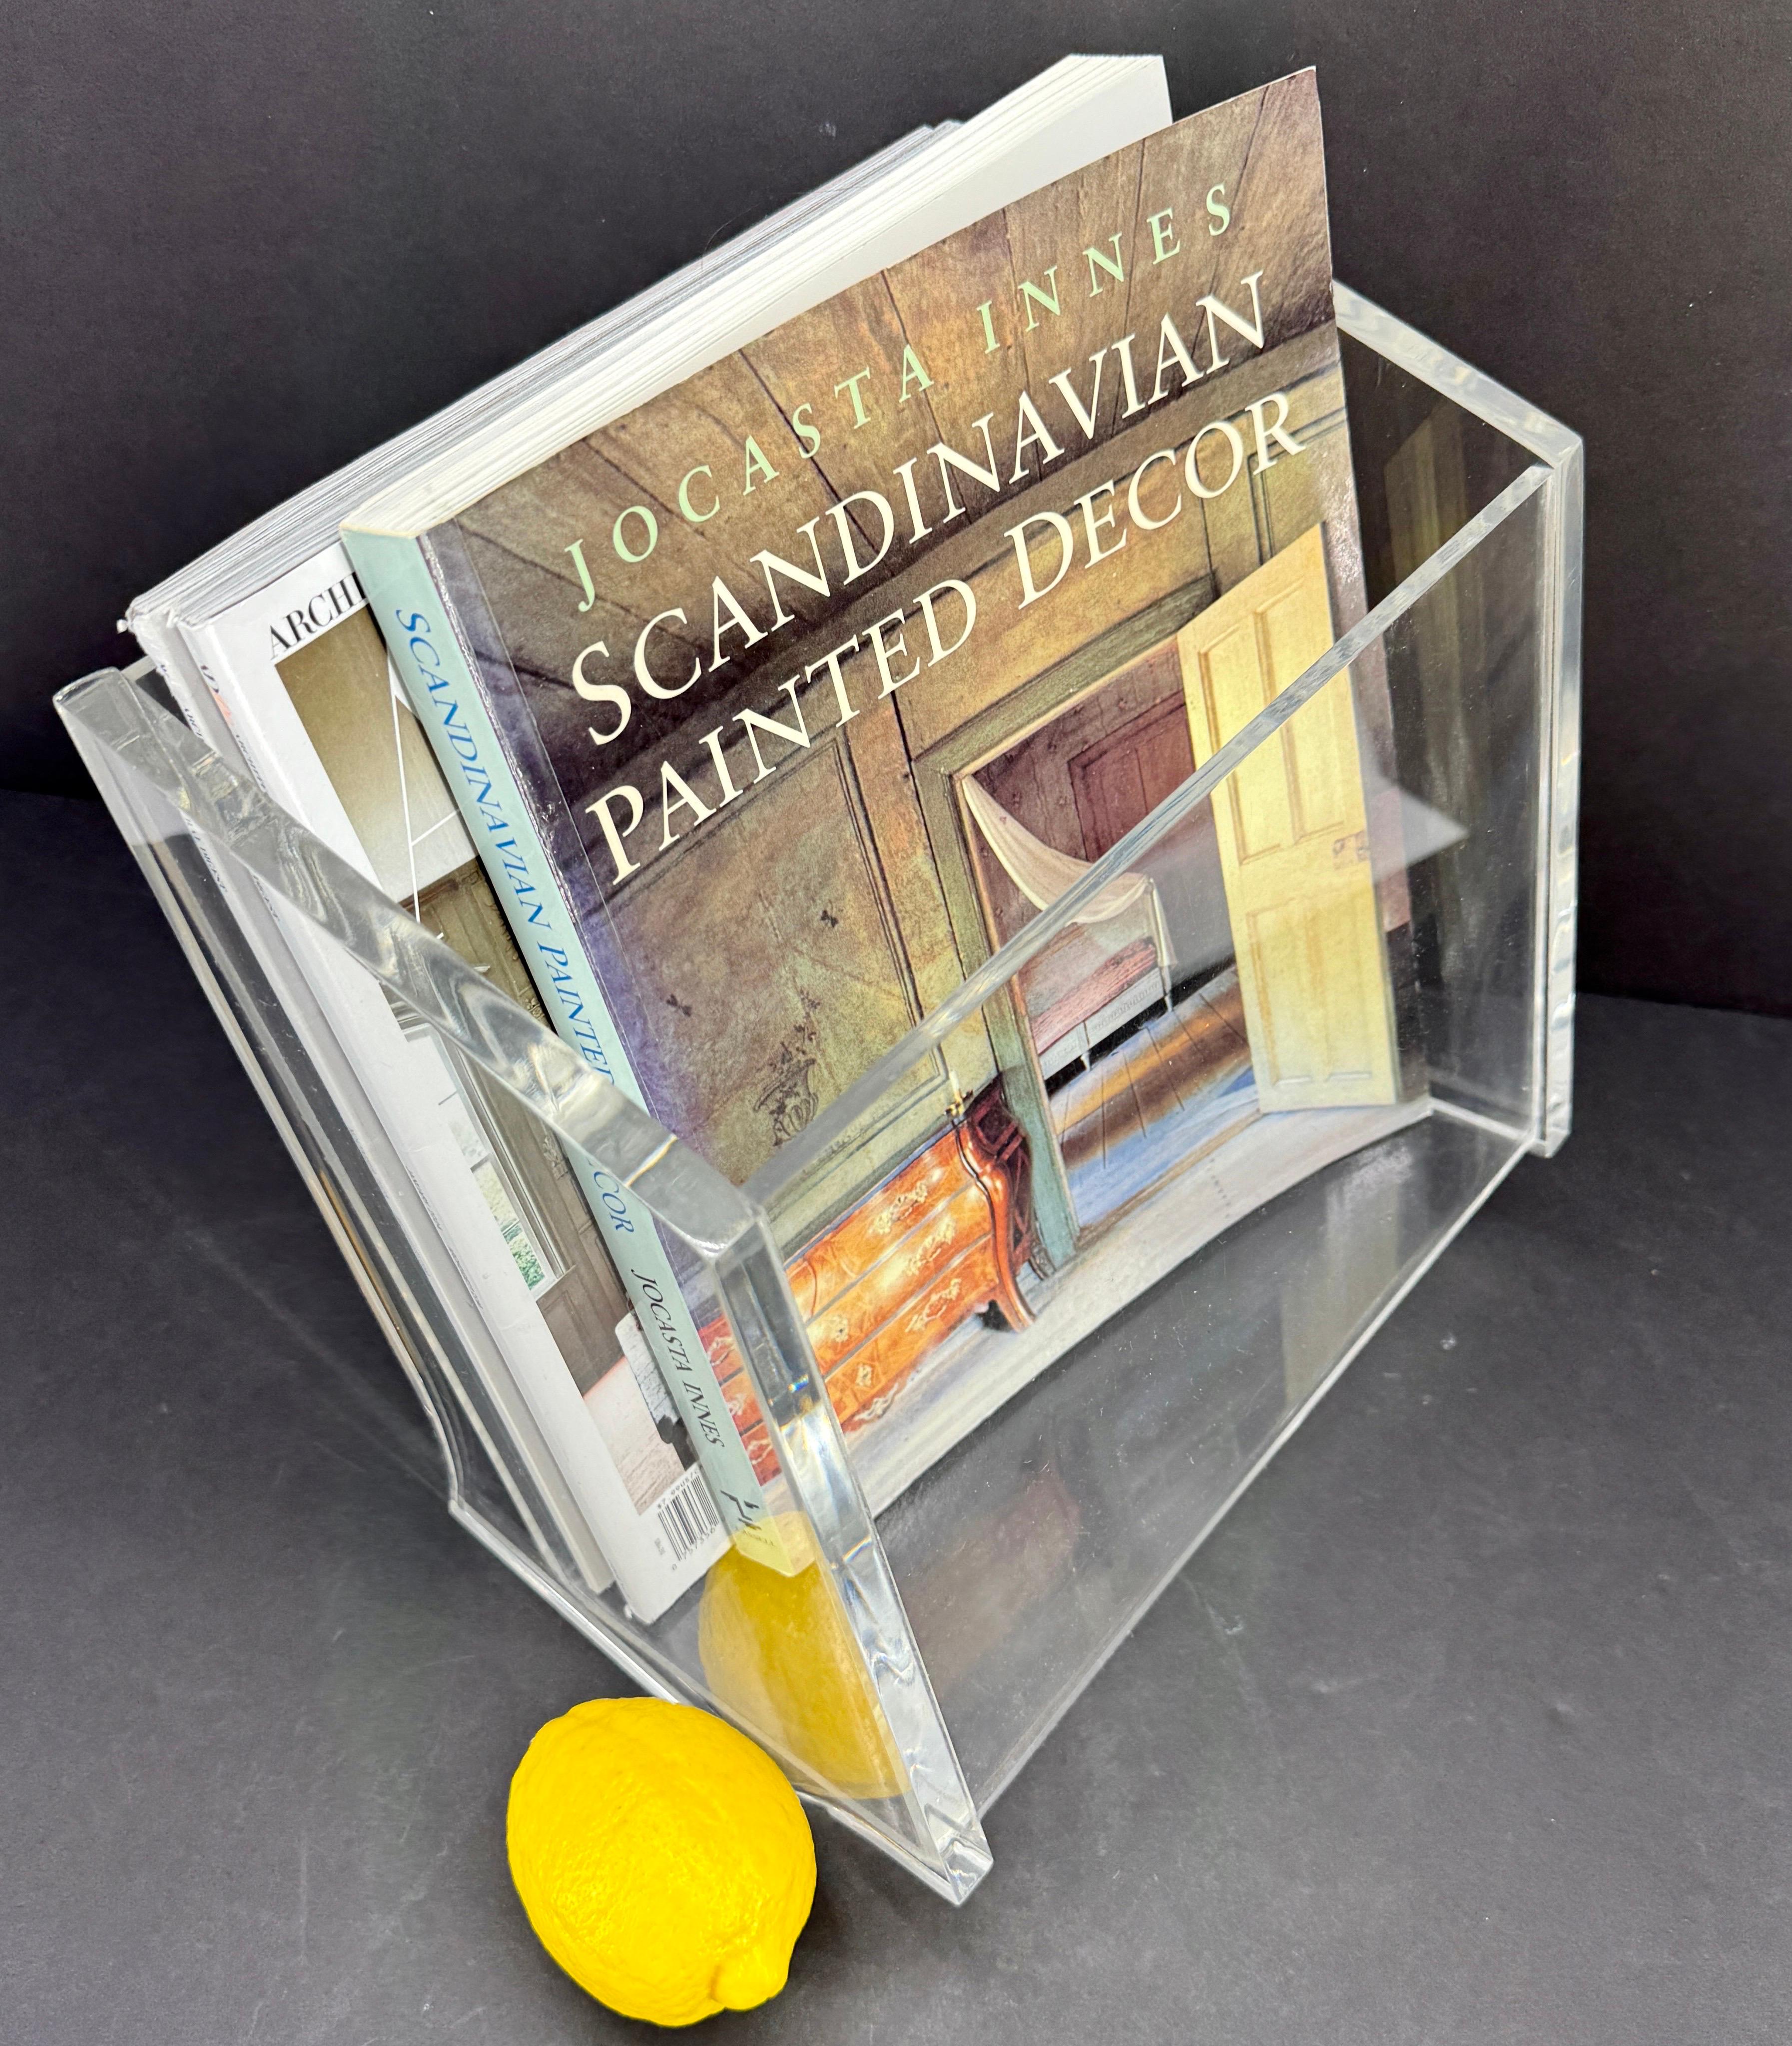 Mid-Century Modern Magazine Rack in Thick Lucite, Italy 1970's

This eye-catching lucite magazine rack or stand was hand crafted to stand tilted slightly backwards. 
The inside measurements are 9.75 inches in width, 4.95 inches in depth and 10.25